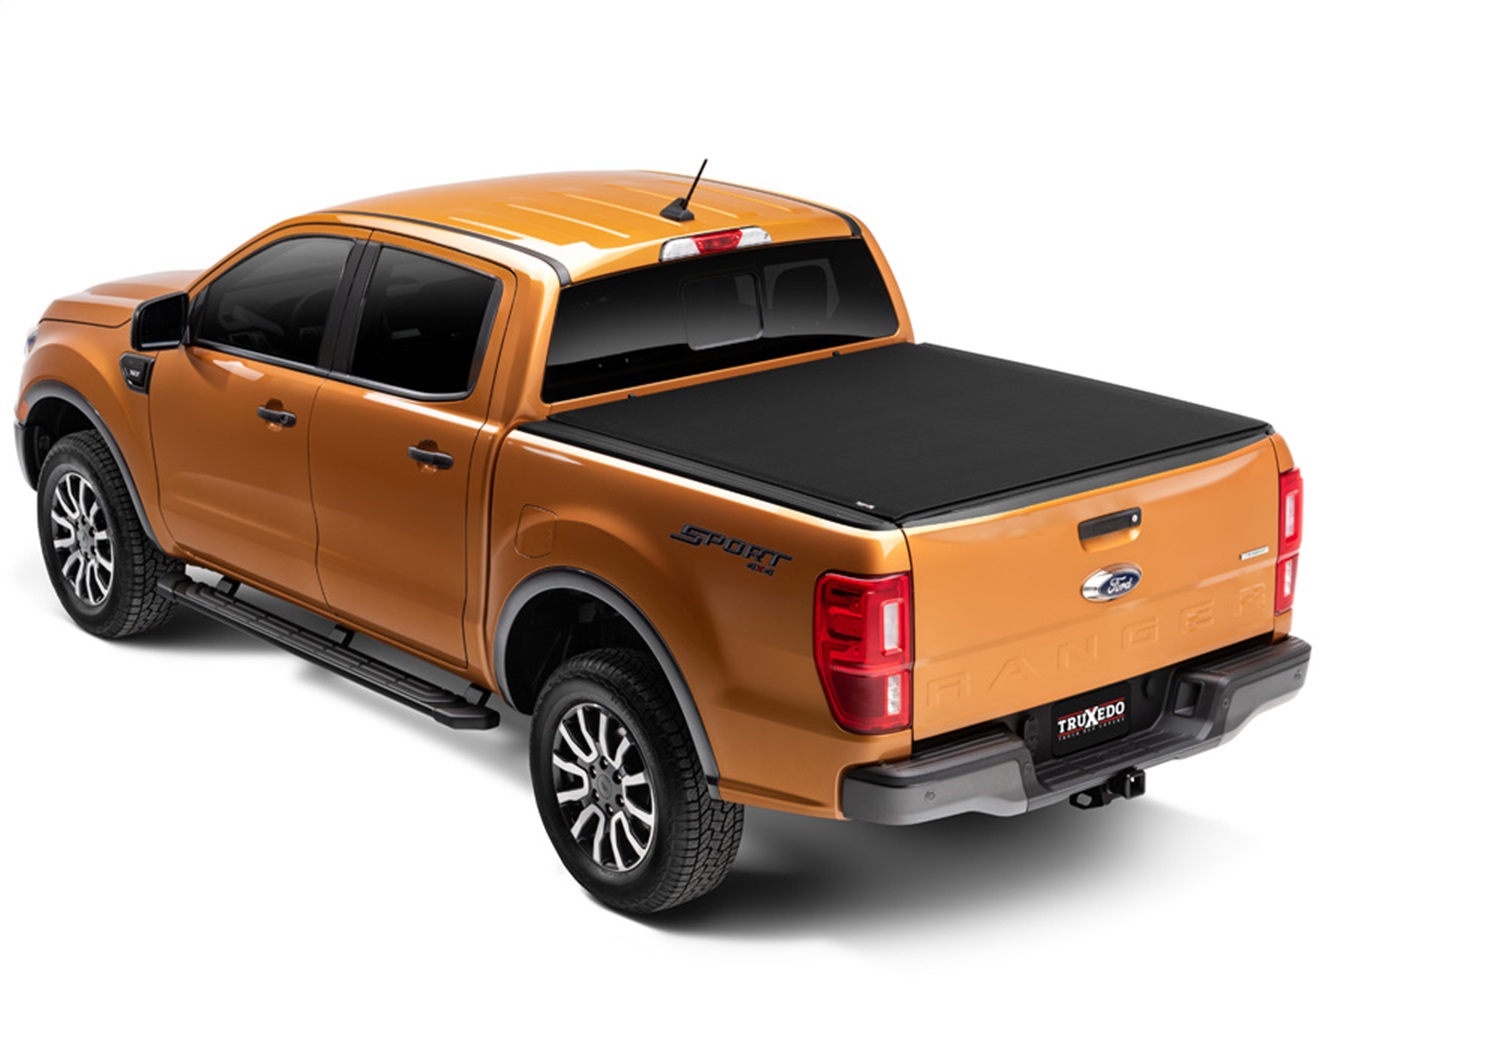 Soft Folding Truck Bed Tonneau Cover Fits 2019-2021 Ford Ranger 5 1 Bed Tonno Pro Tonno Fold 61 42-317